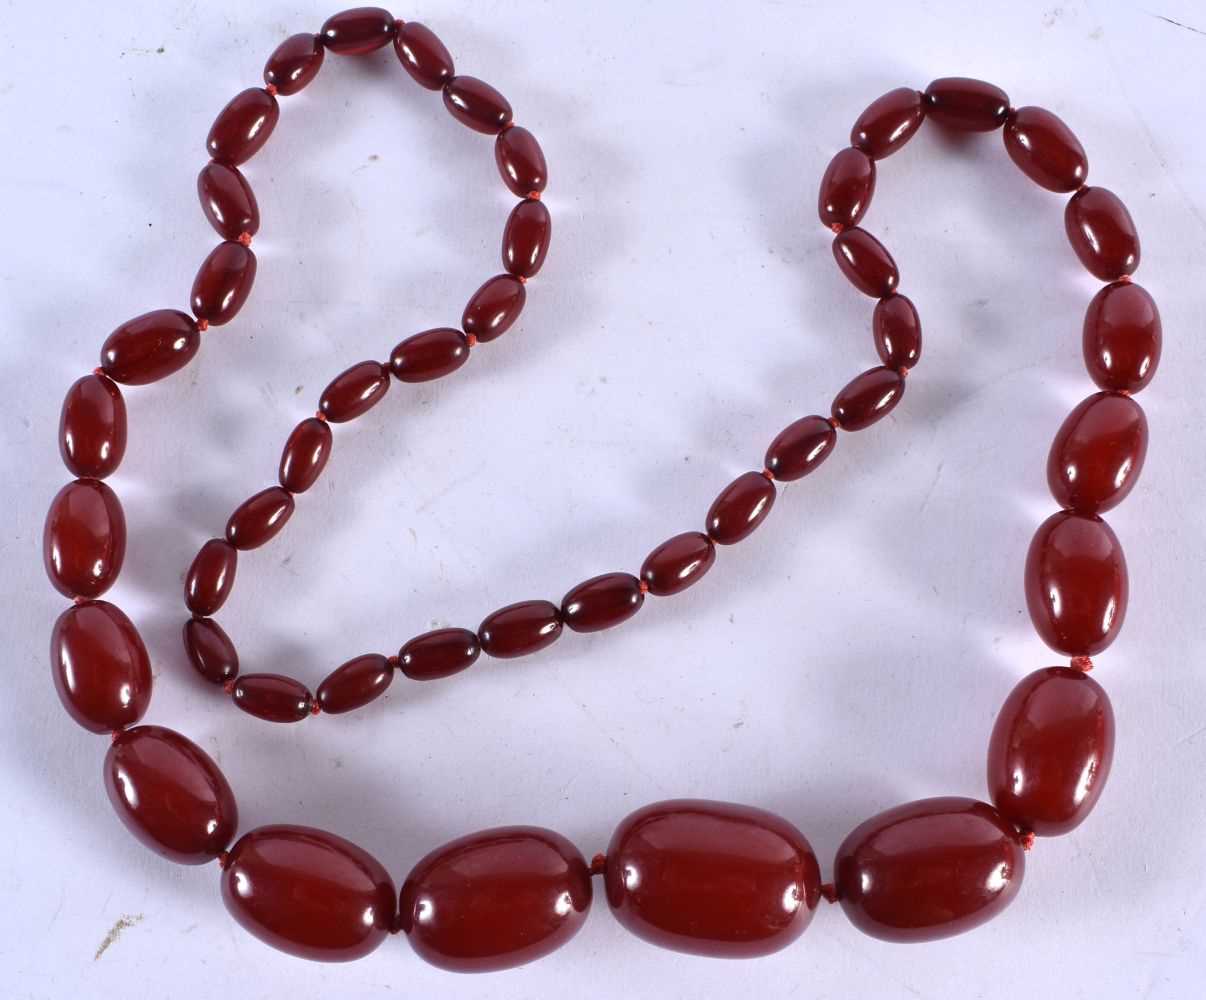 A Graduated Cherry Amber Bead Necklace. 78cm long, largest bead 23mm, smallest bead 7mm, total